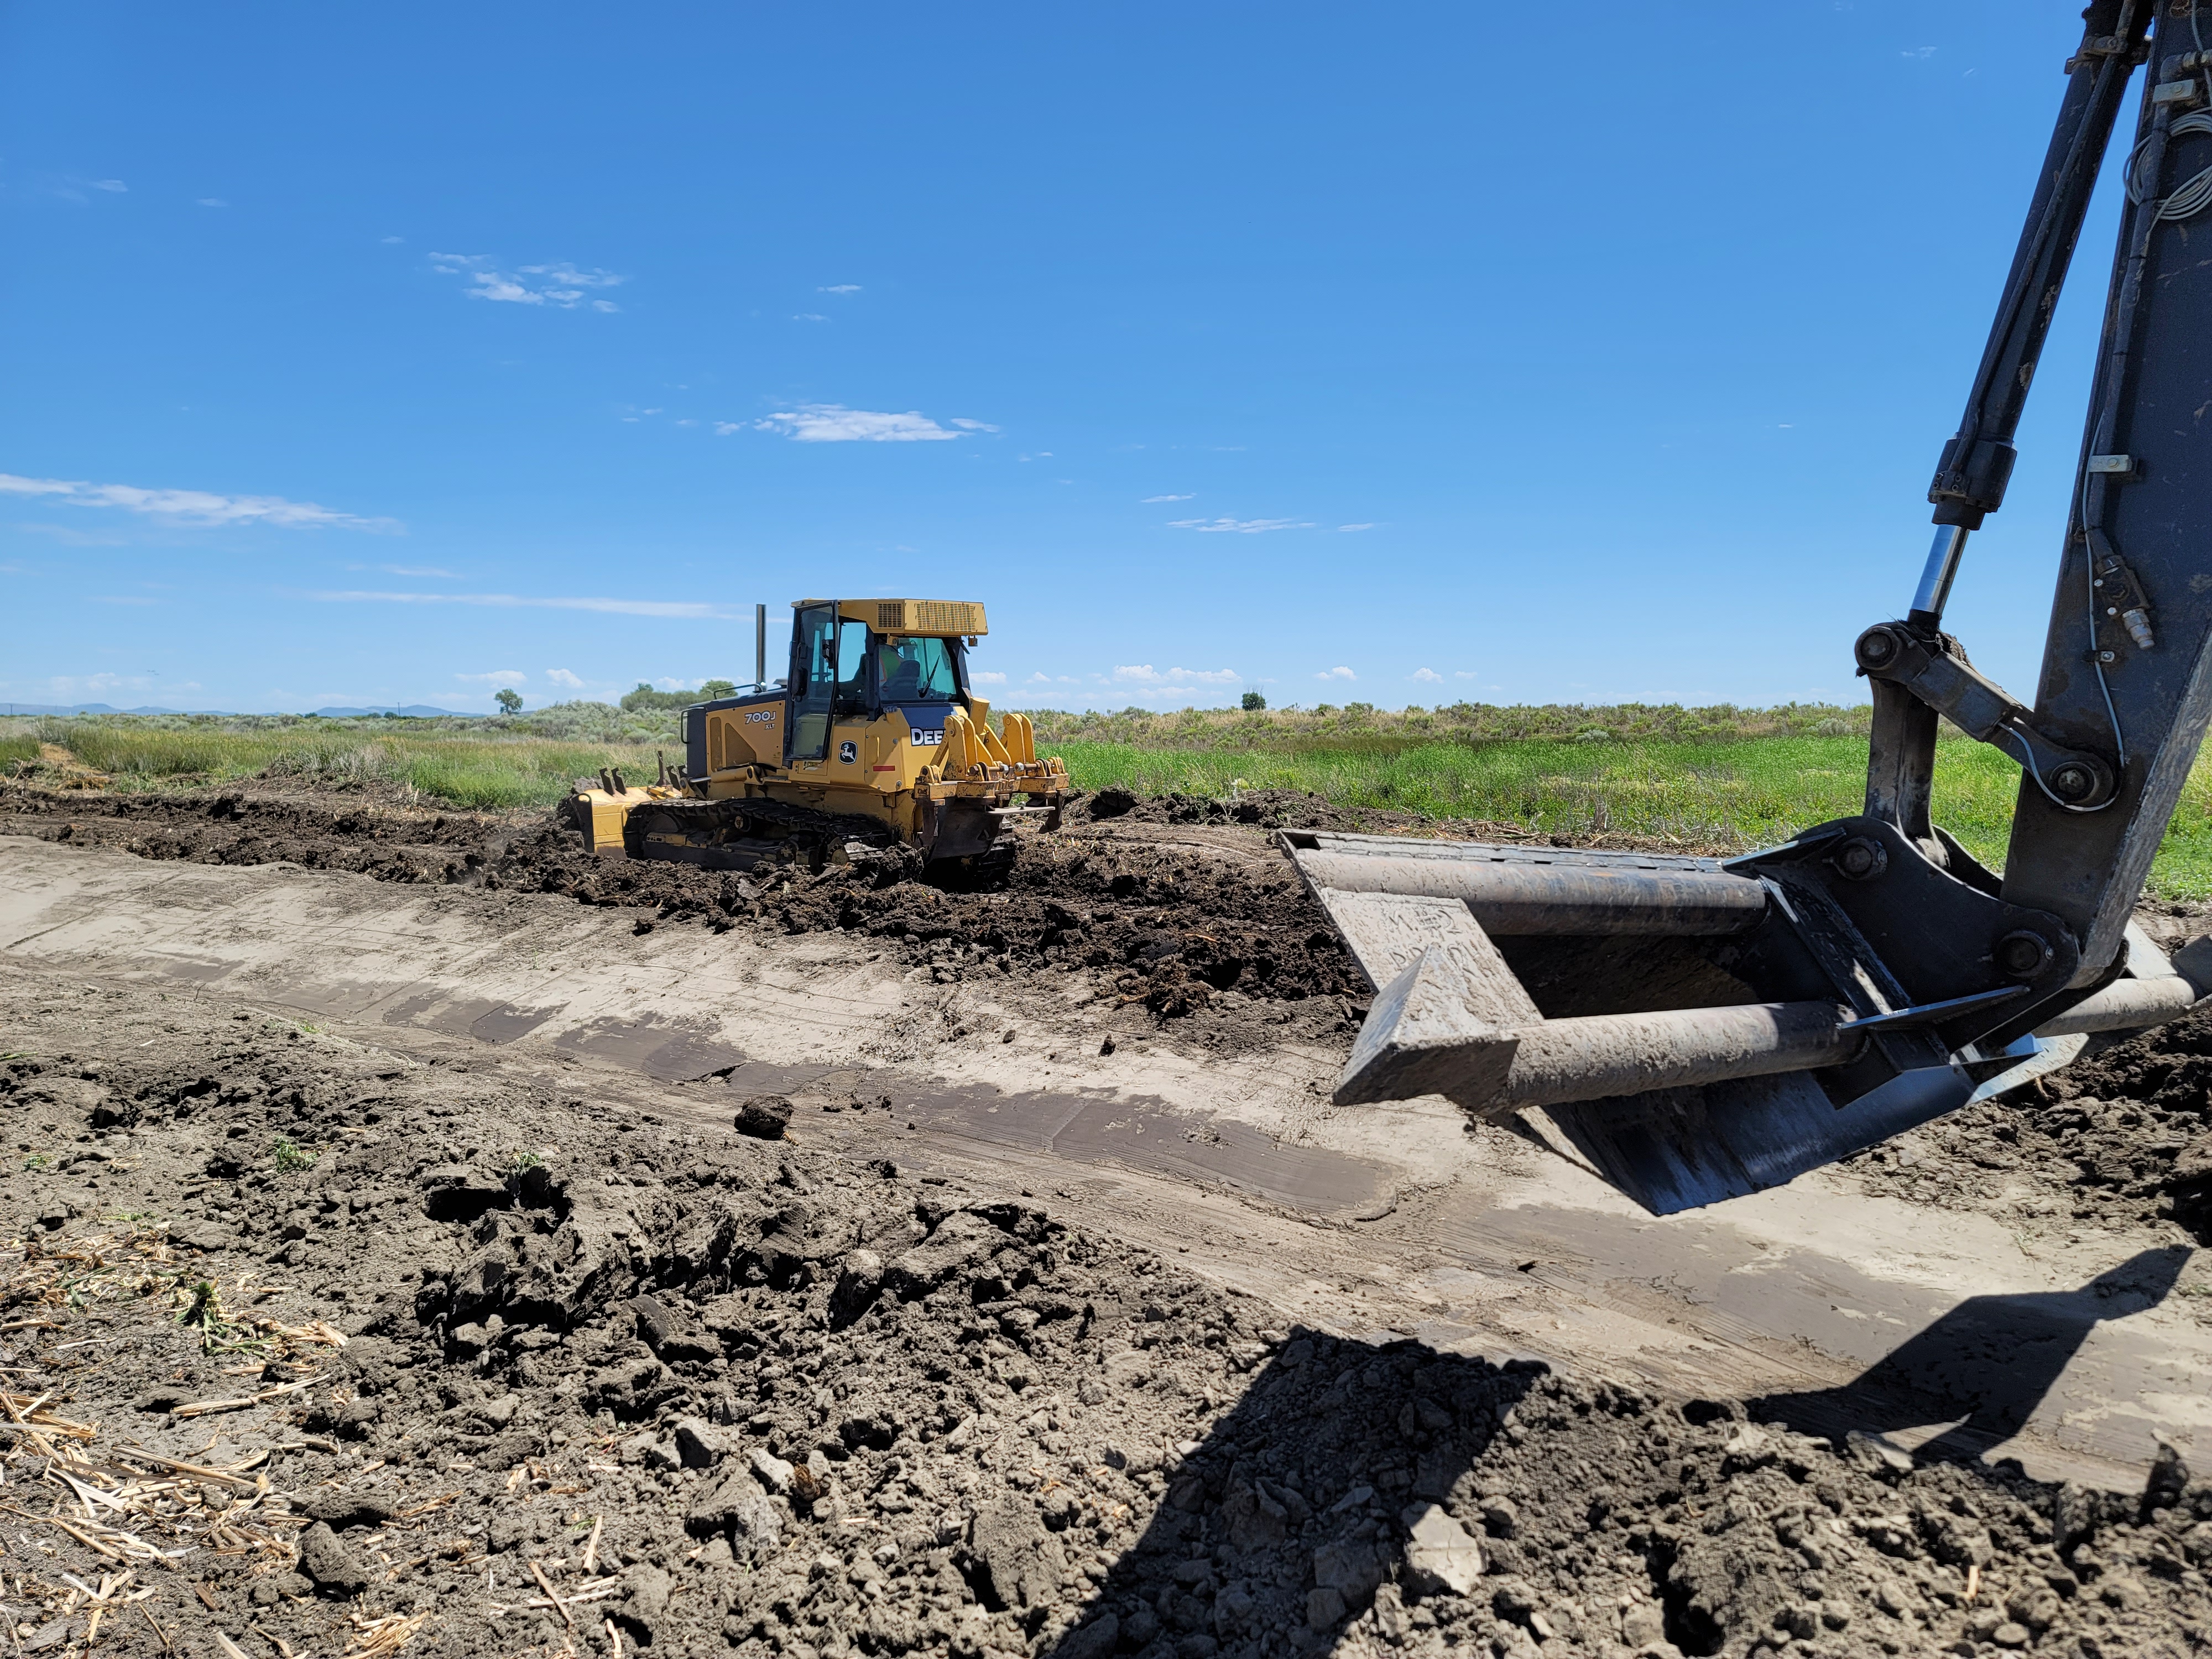 Heavy machinery dredges and clears a path at Idaho refuge on clear day